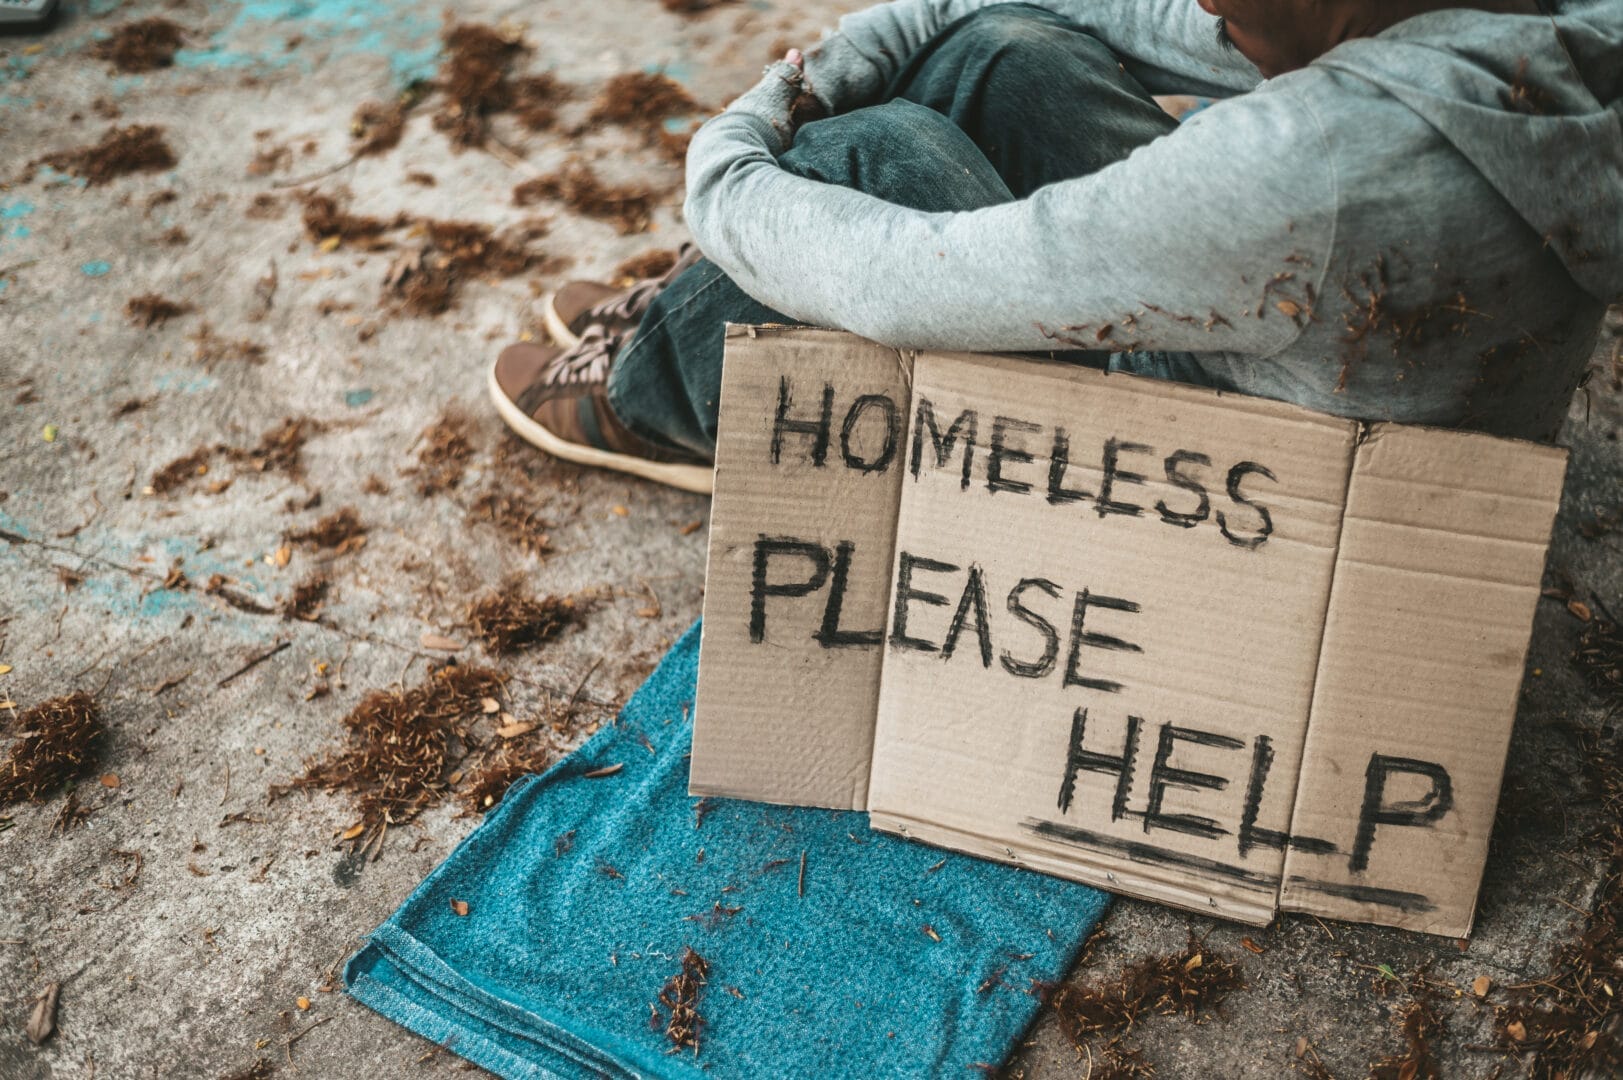 Beggars Sitting Street With Homeless Messages Please Help ?strip=all&lossy=1&ssl=1